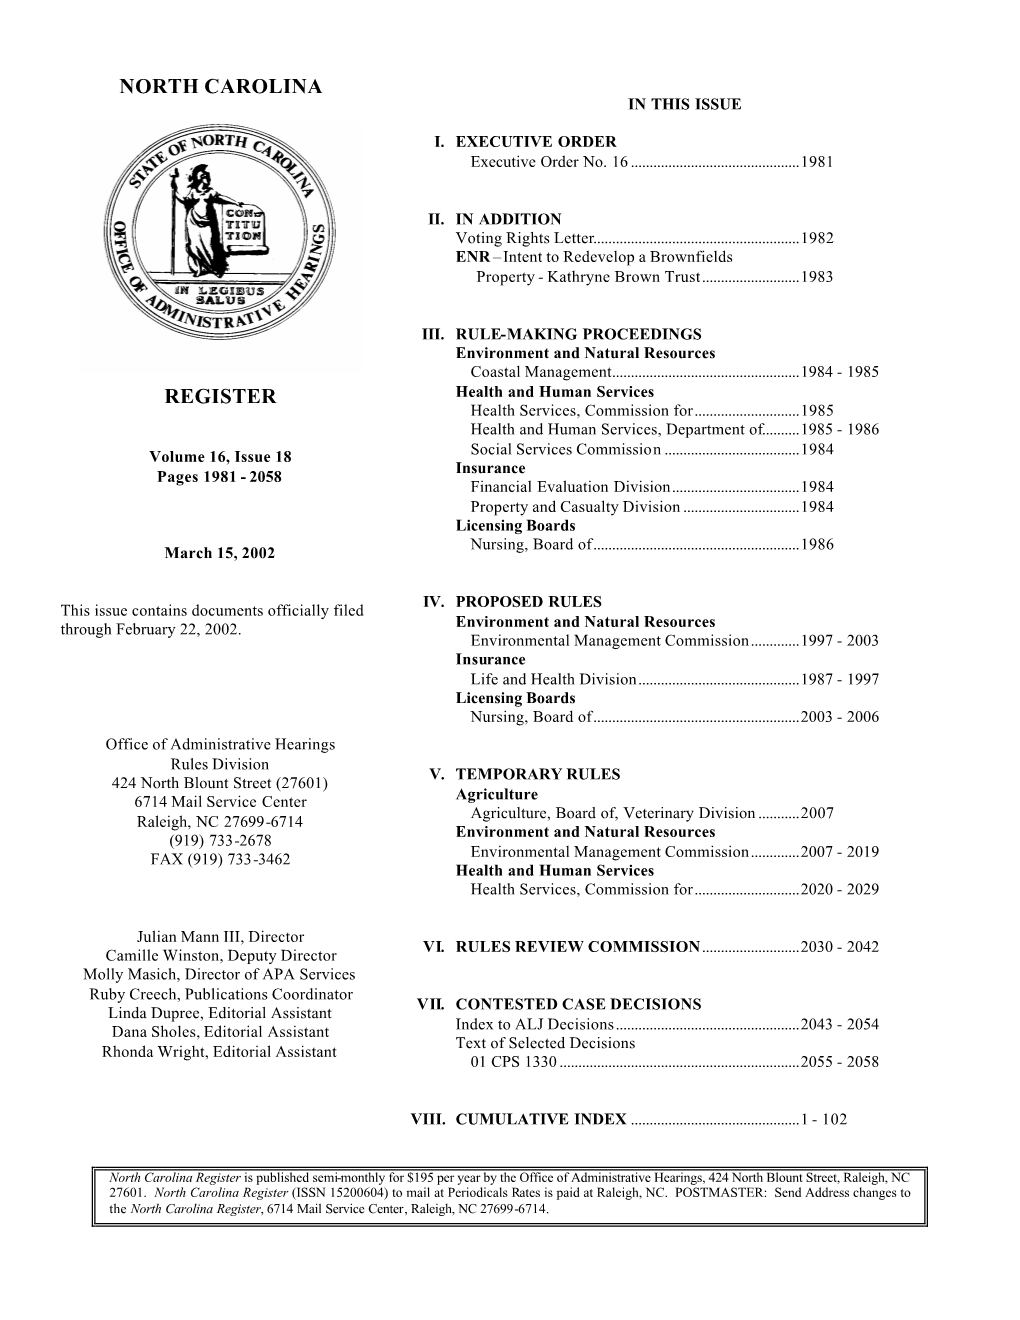 Volume 16, Issue 18, March 15, 2002